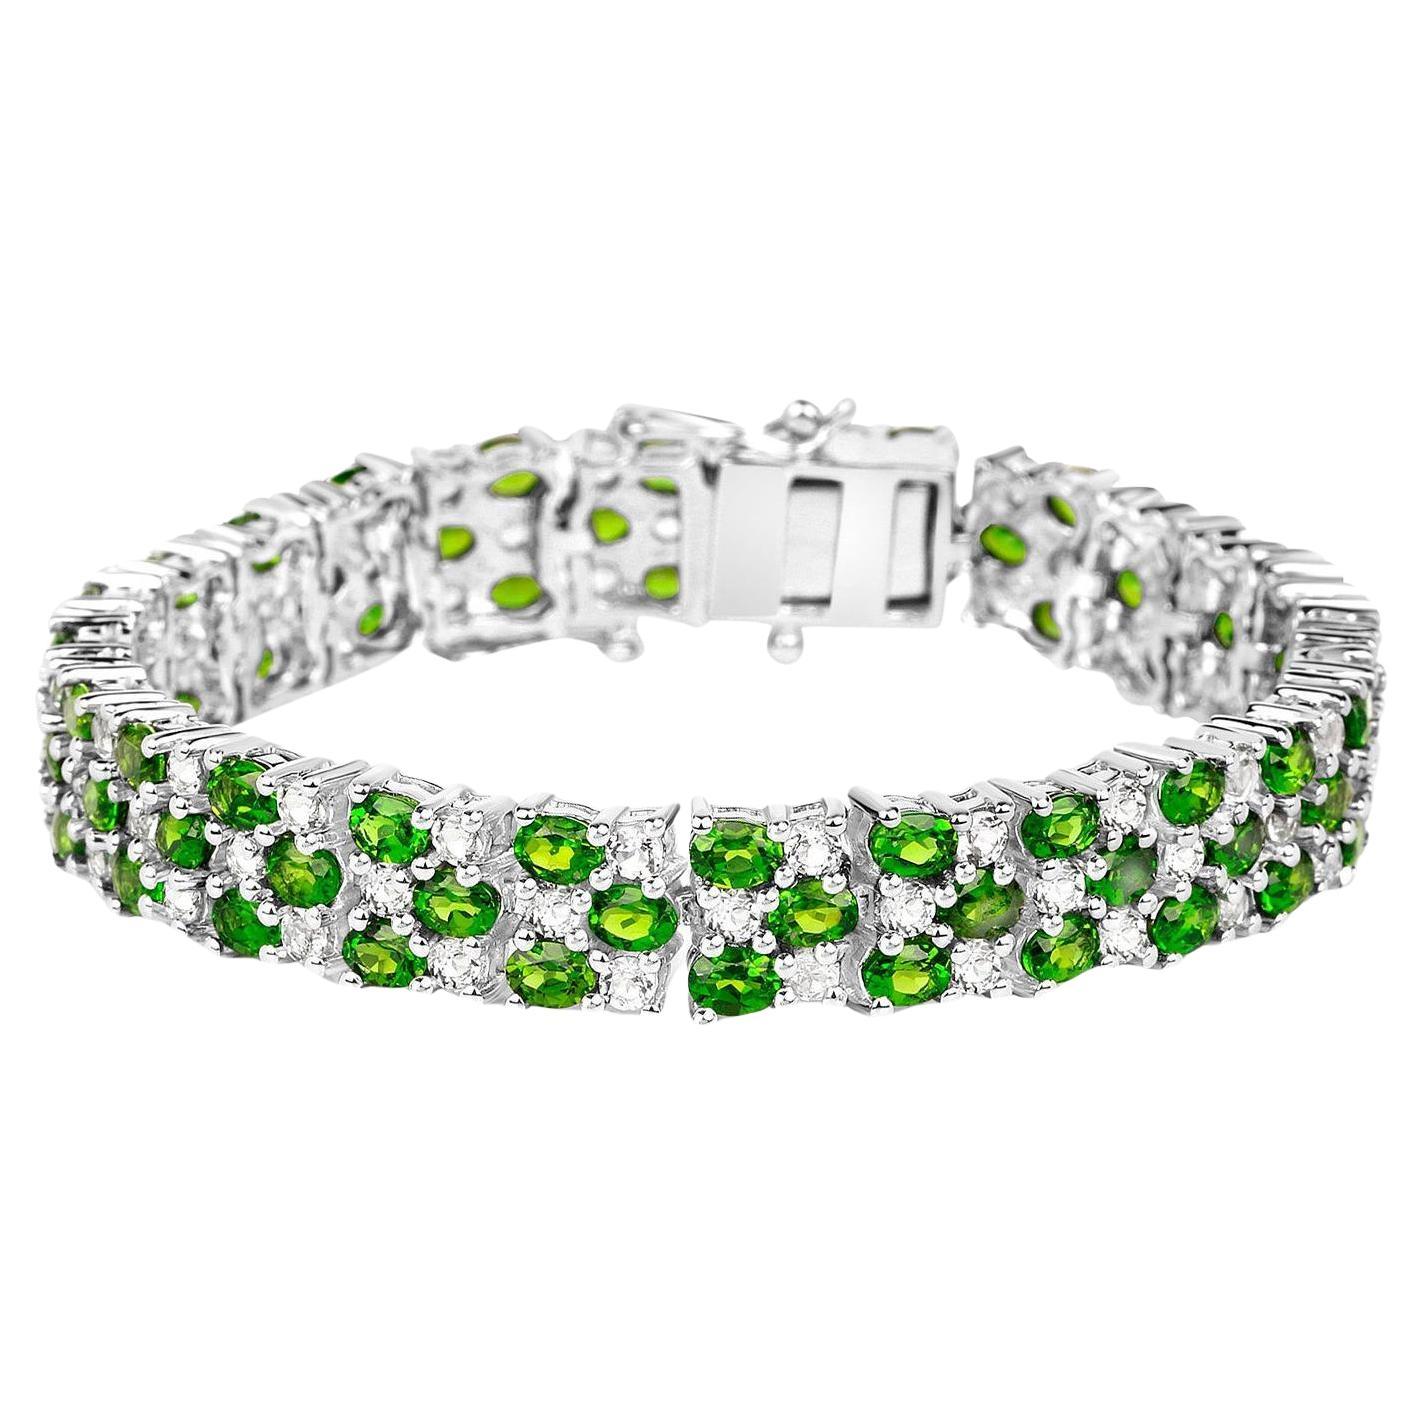 Chrome Diopside Tennis Bracelet With White Topazes 17.28 Carats Rhodium Plated S